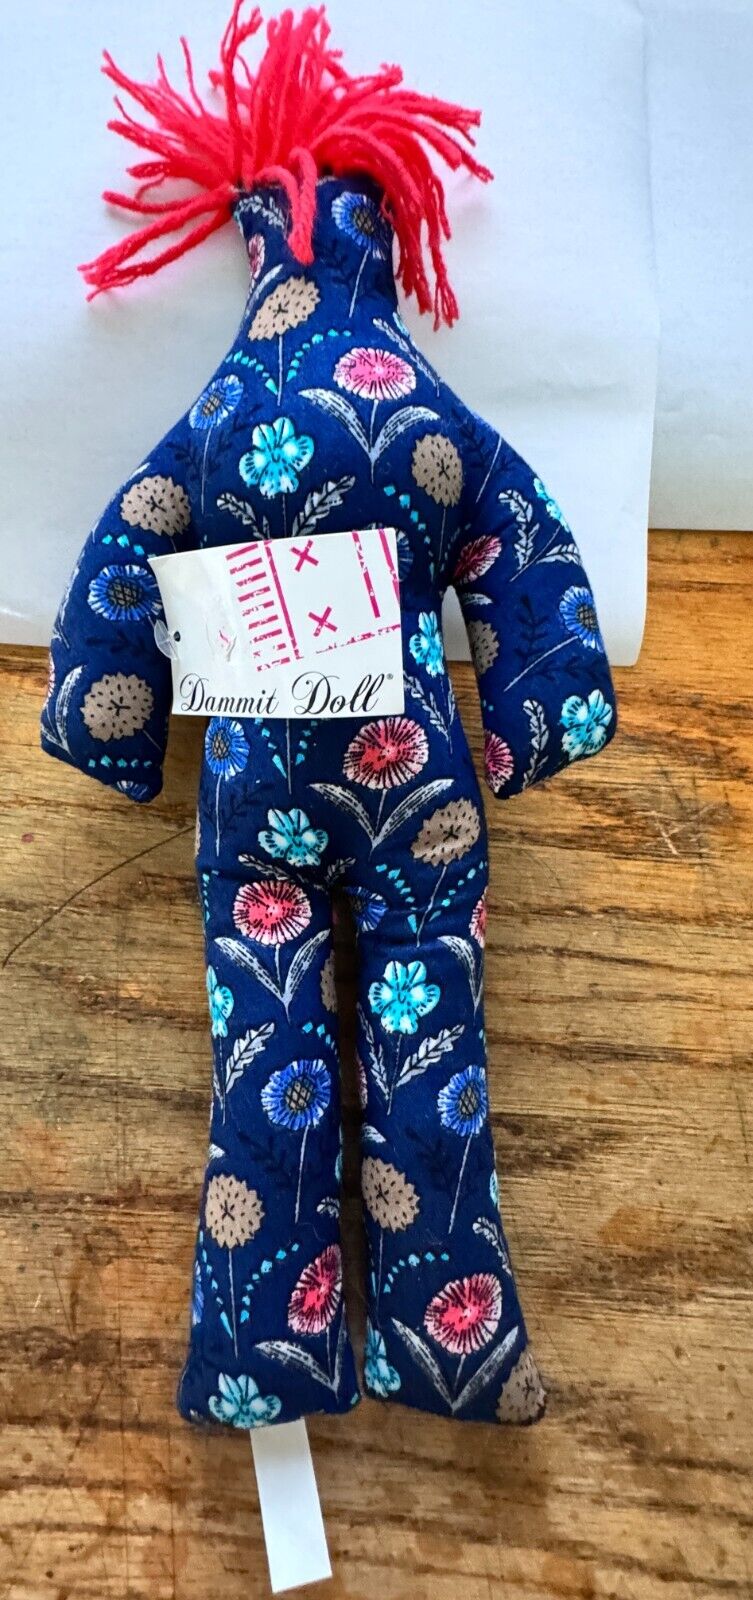 COOL BEANS BLOWOUT: Dammit Doll 2017 Stress Relief Blue NWT TKH